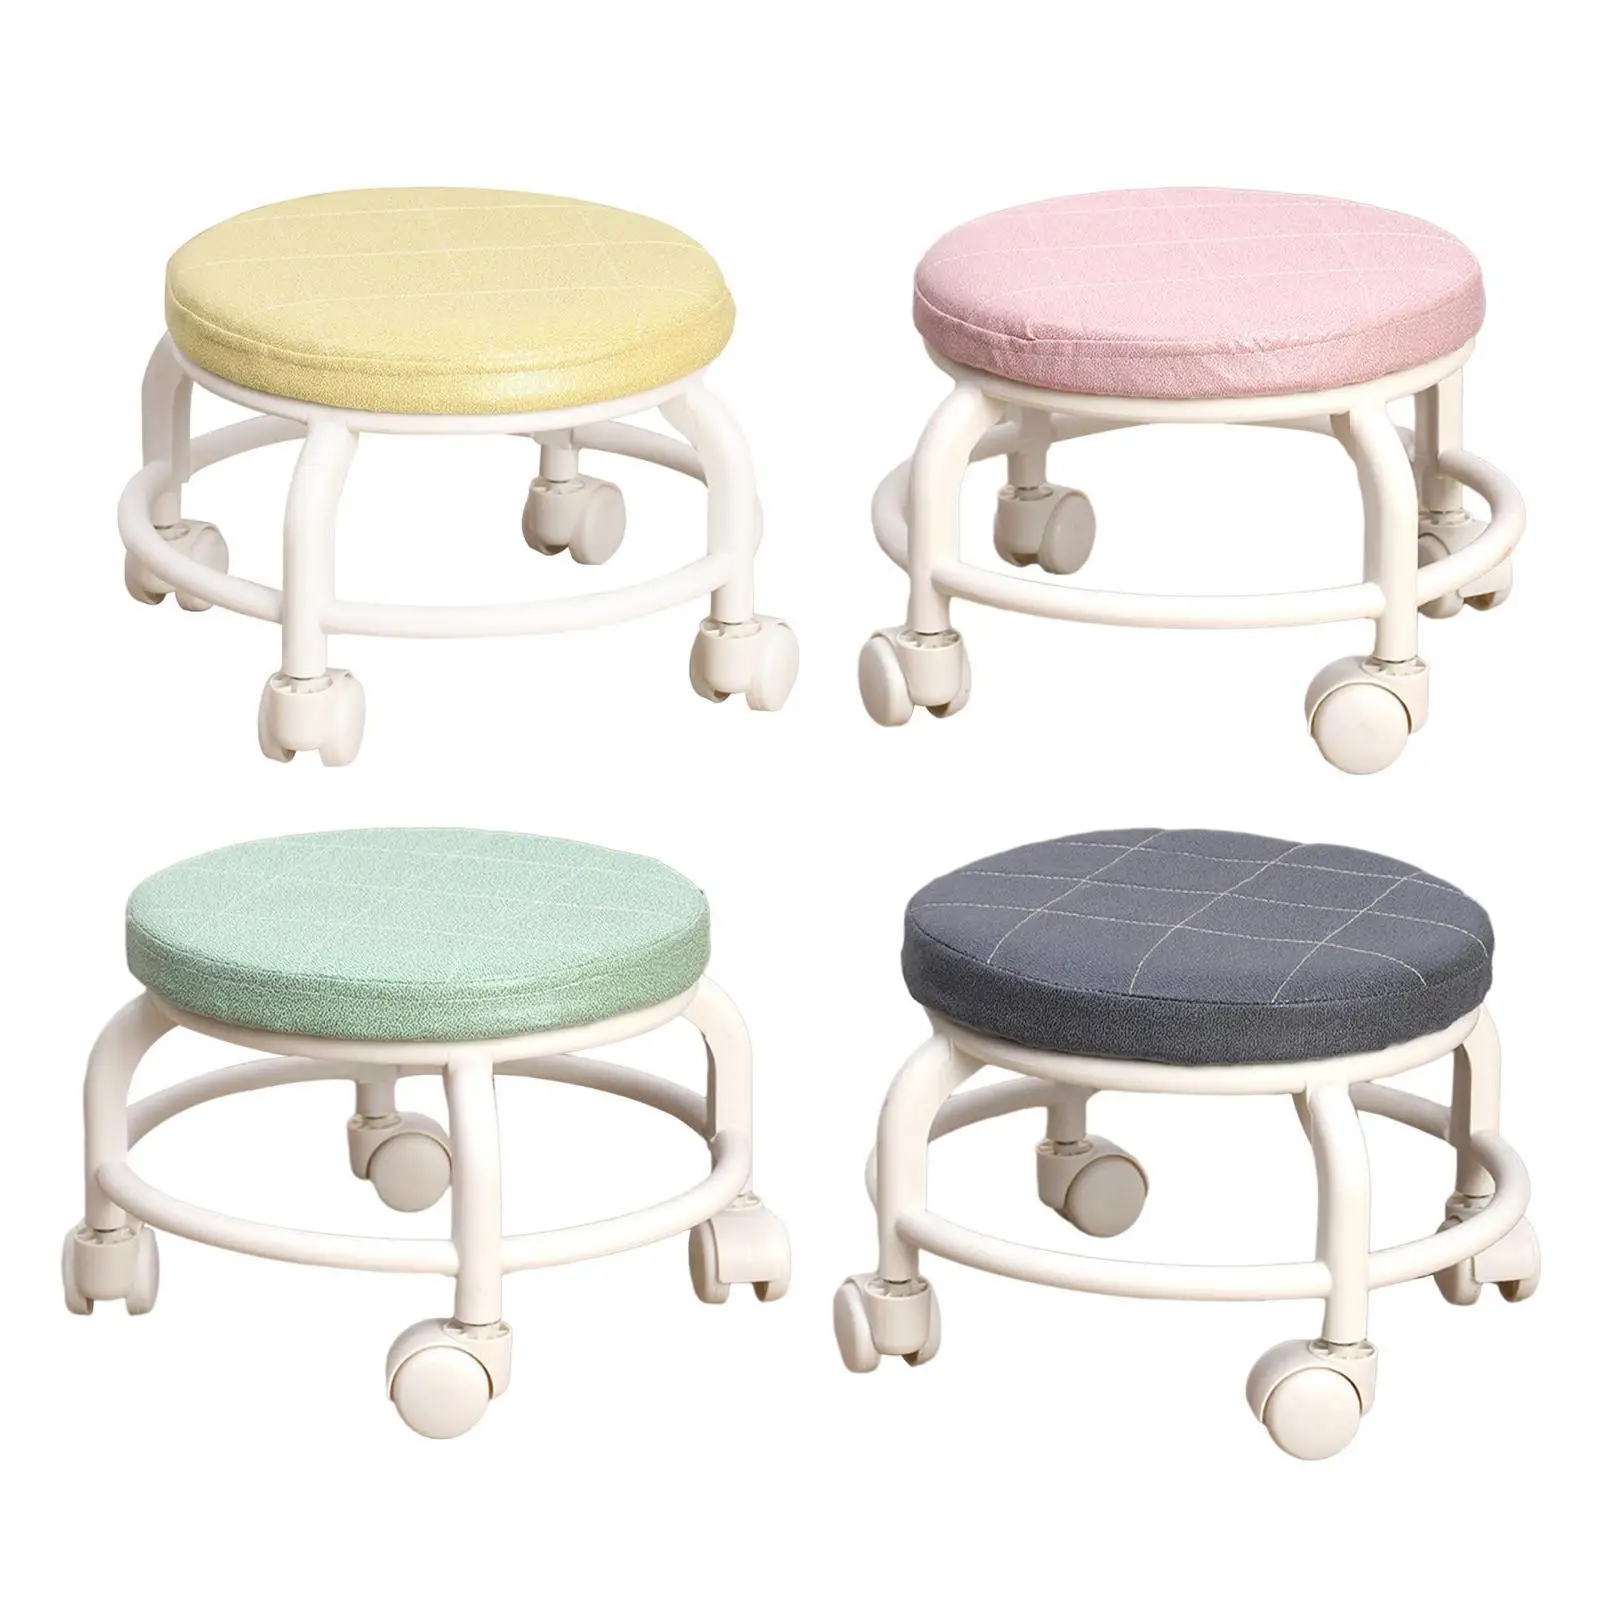 Low Round Roller Seat Stool Portable Footrest 360 Degree Rotating Rolling Stool Pulley Wheel Stool Salons Kitchen